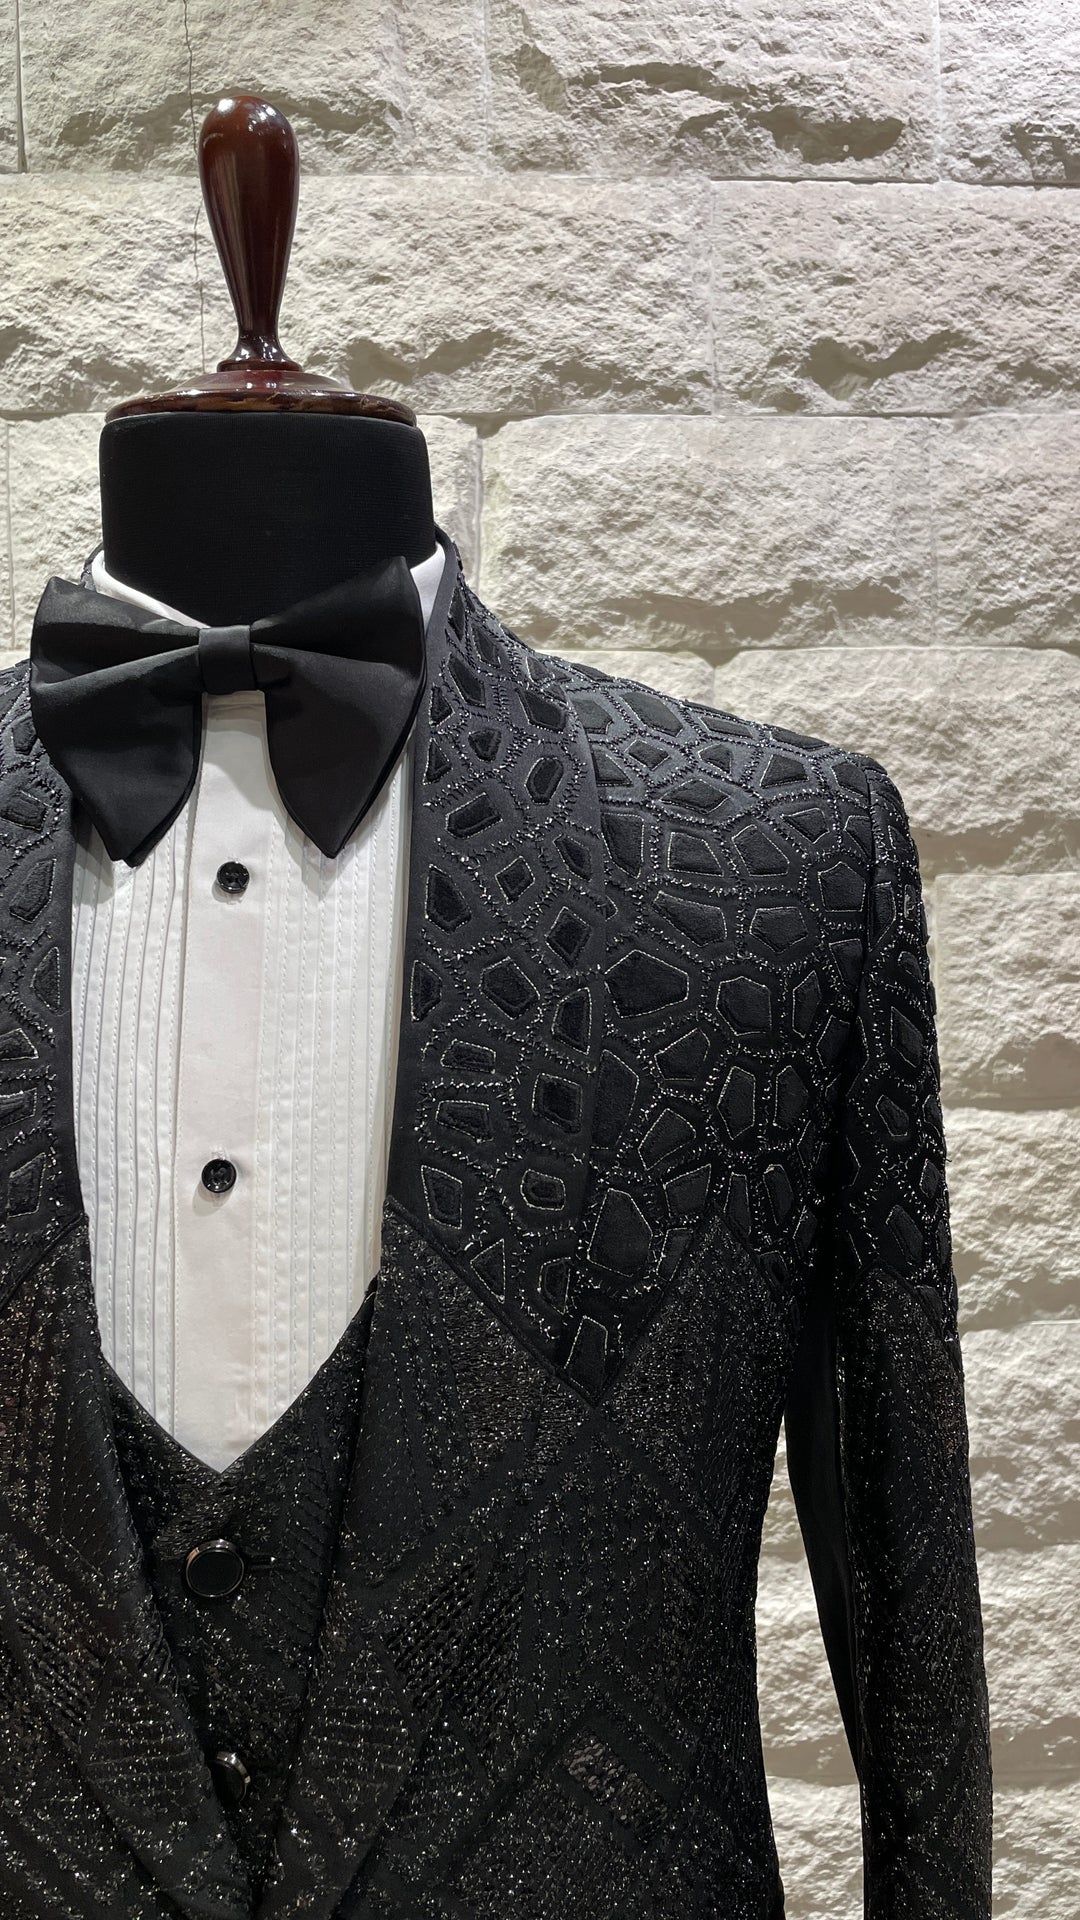 Black Tuxedo with silver details